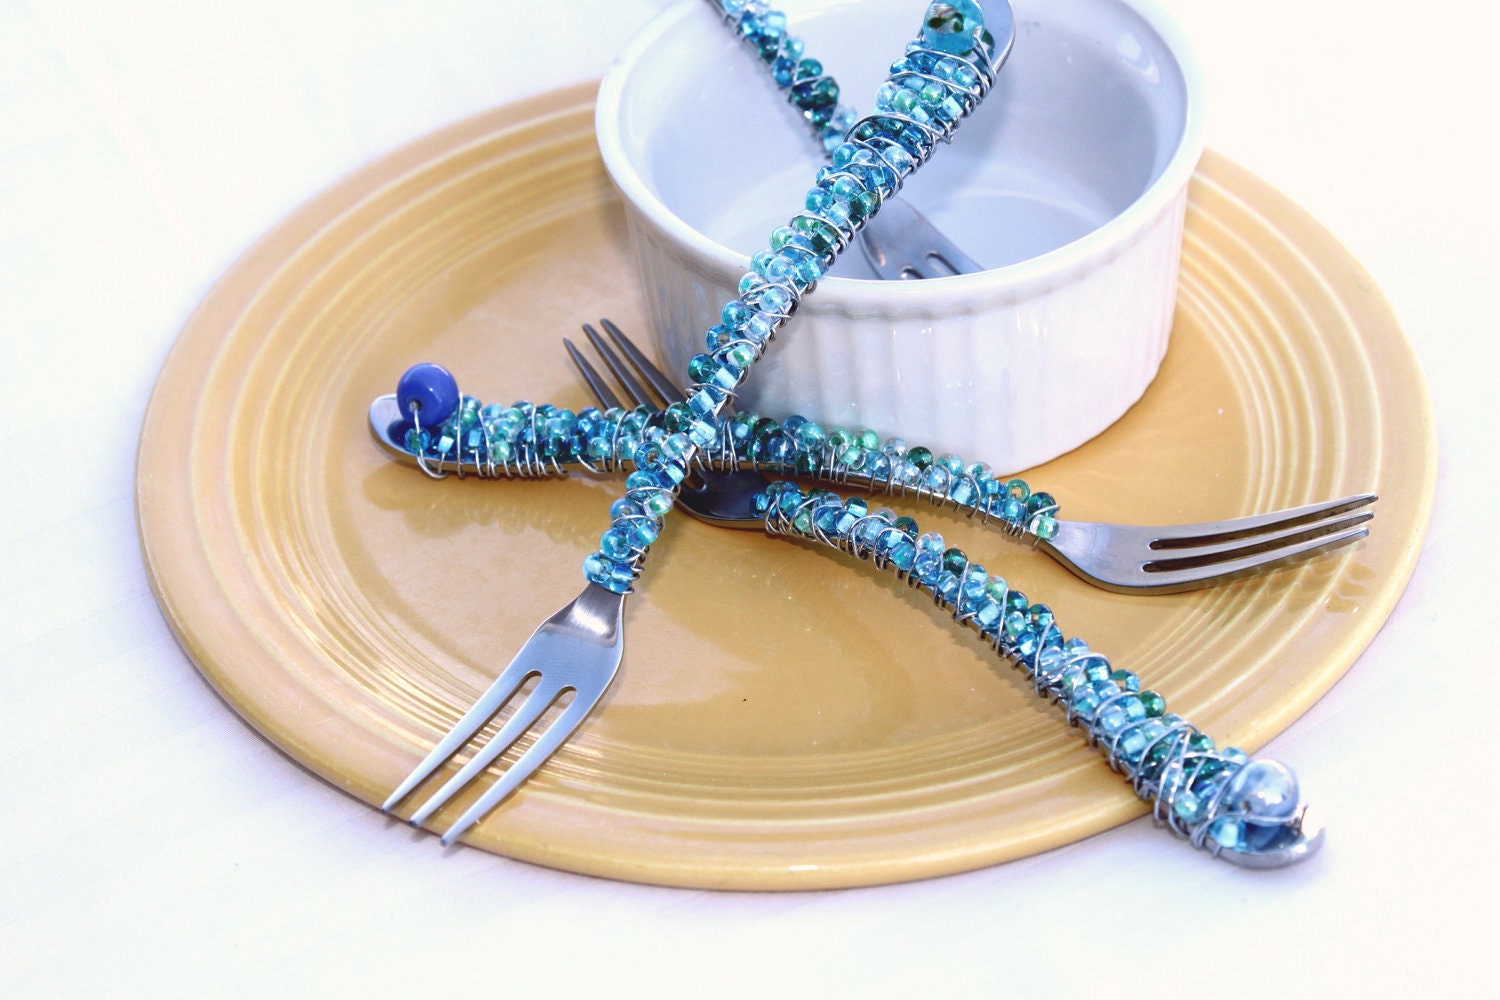 Shimmering Sea glass blue copper cocktail forks for your best pals soiree